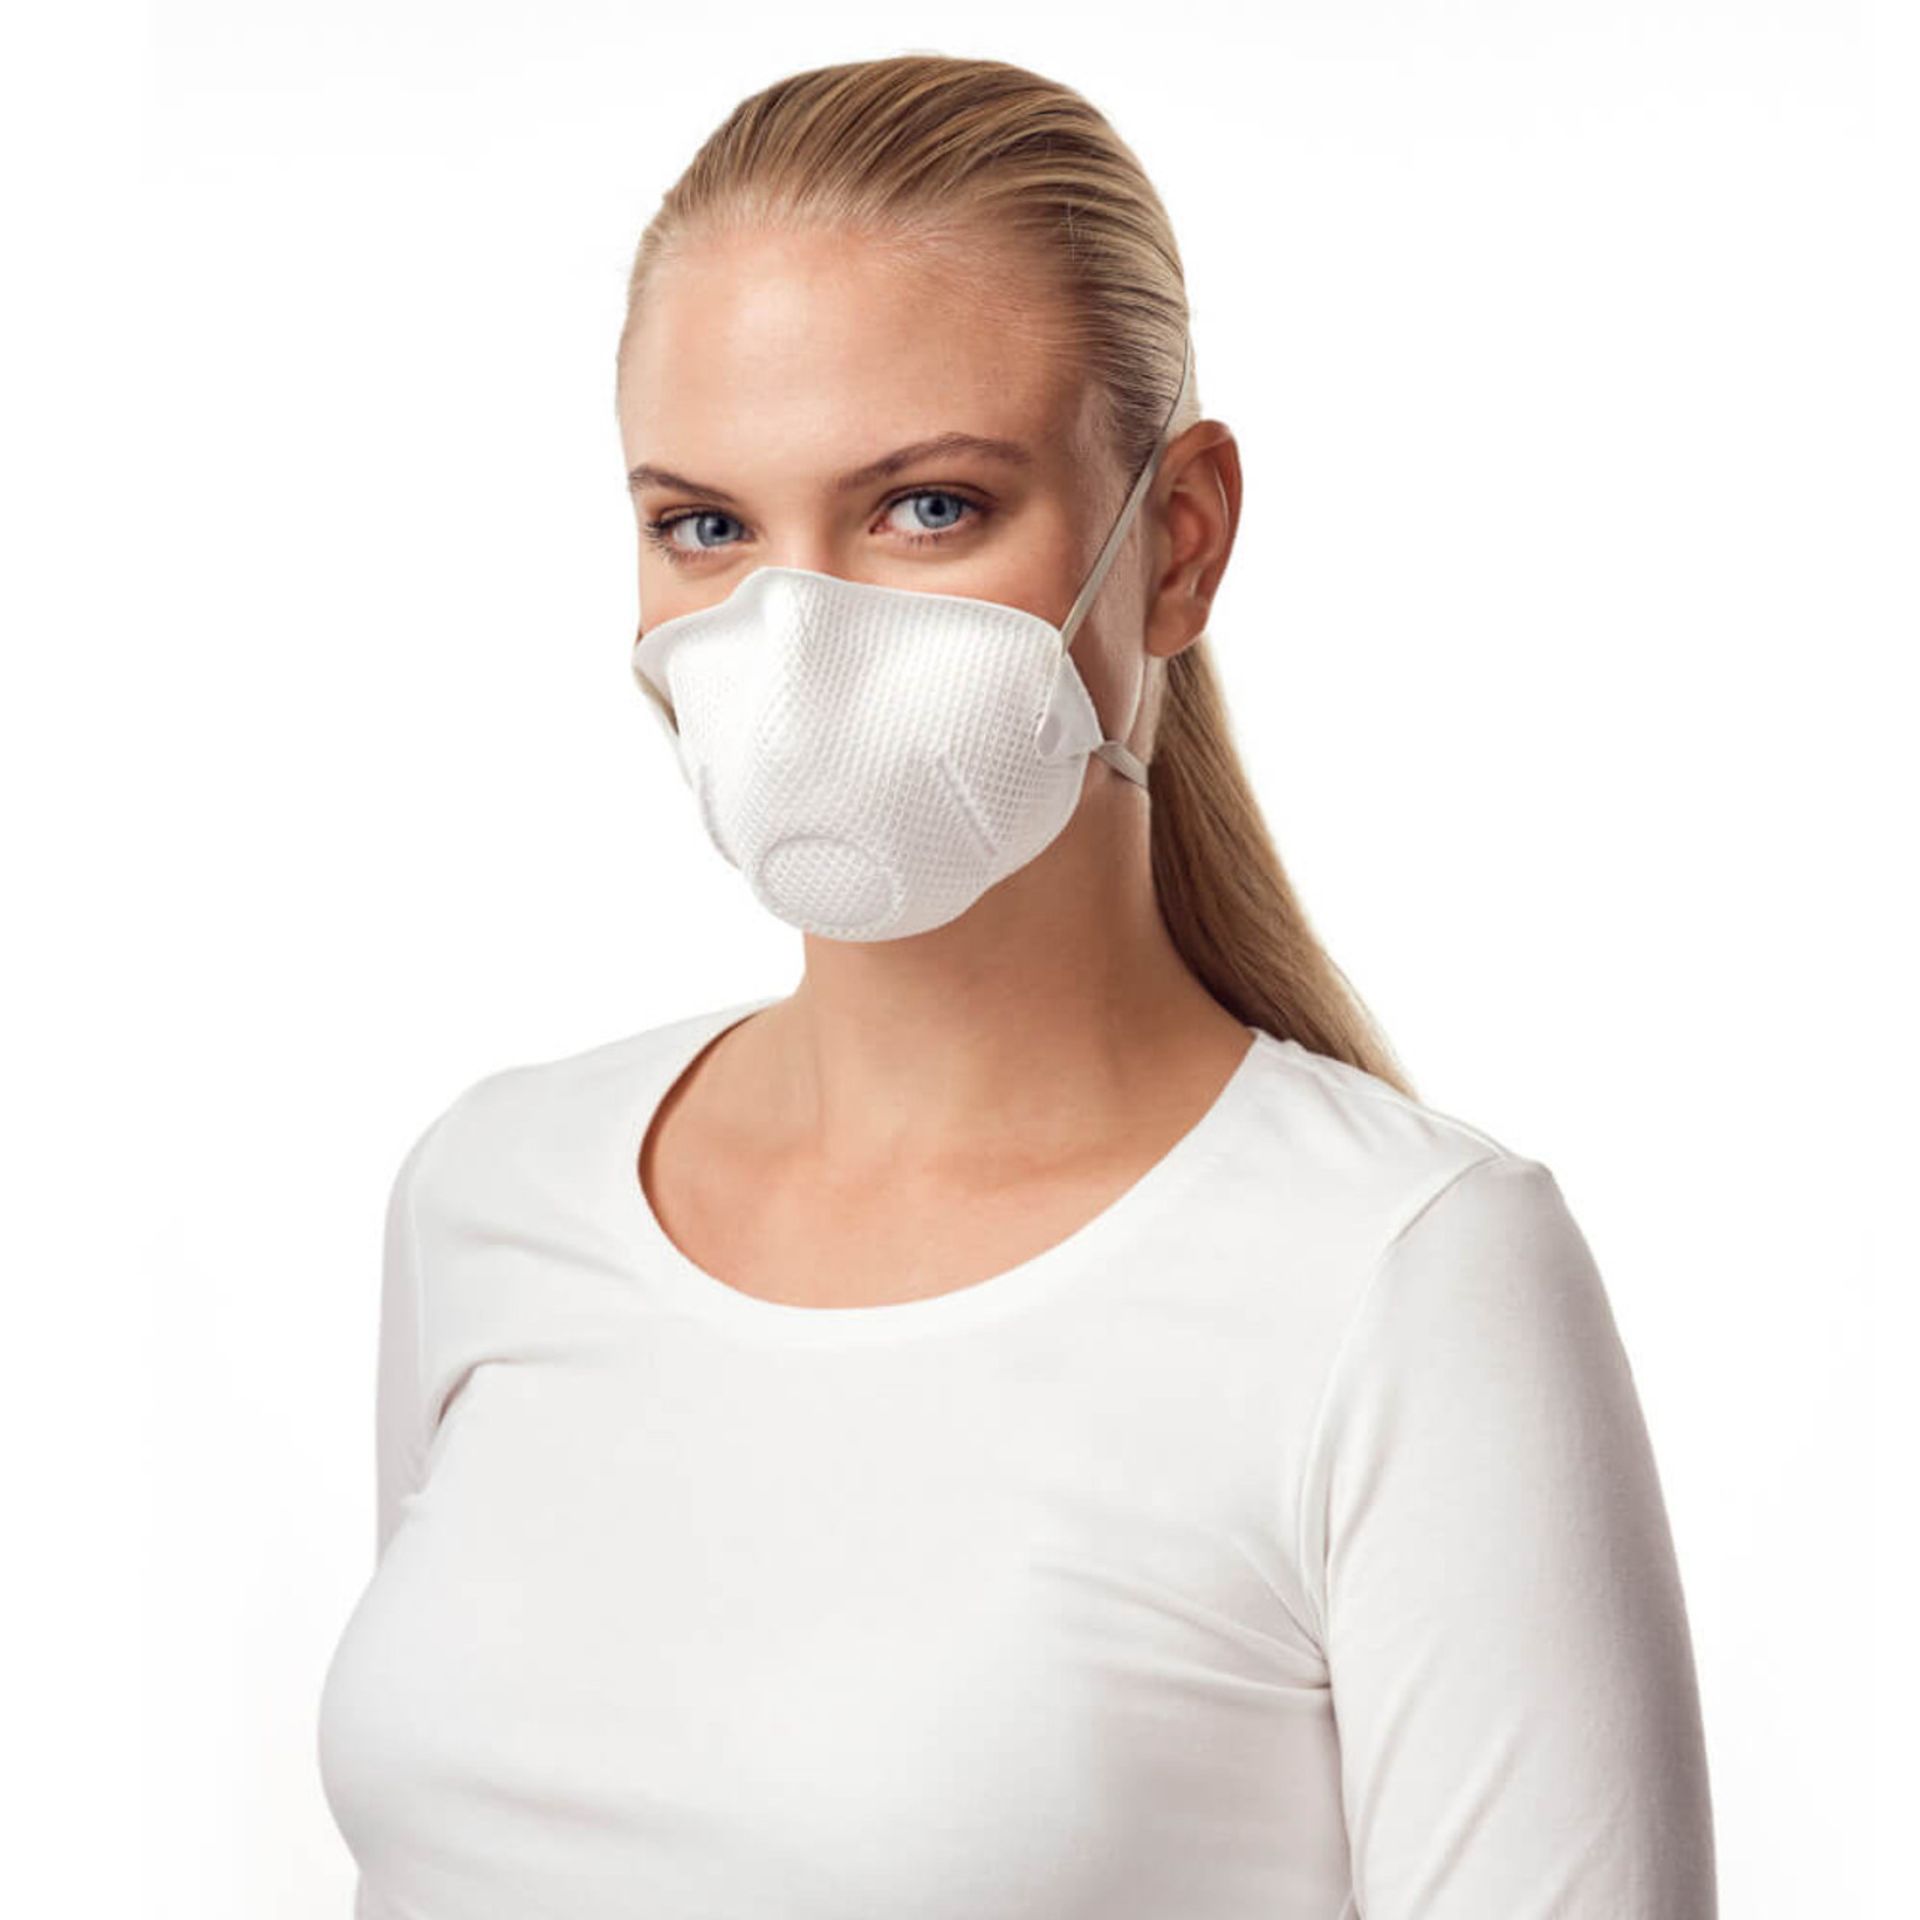 12 BOXES OF MOLDEX 2360 FFP1 CLASSIC DUST MASK NON-VALVED - Image 3 of 3